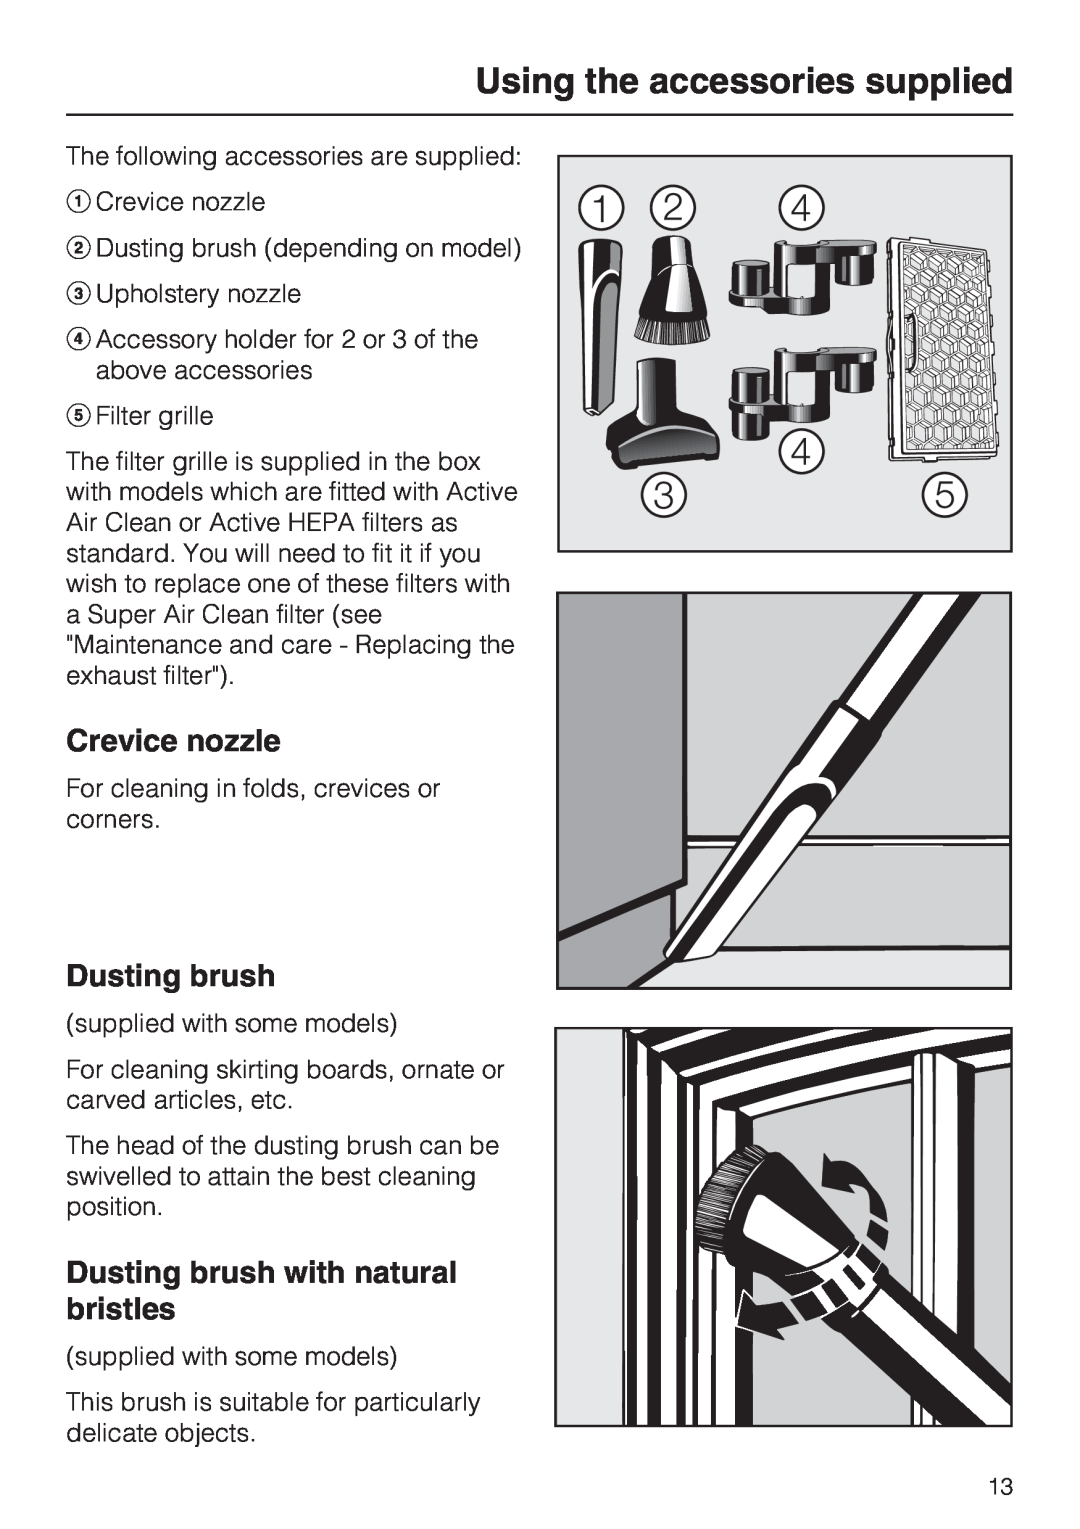 Miele S 4000 Series manual Using the accessories supplied, Crevice nozzle, Dusting brush with natural bristles 